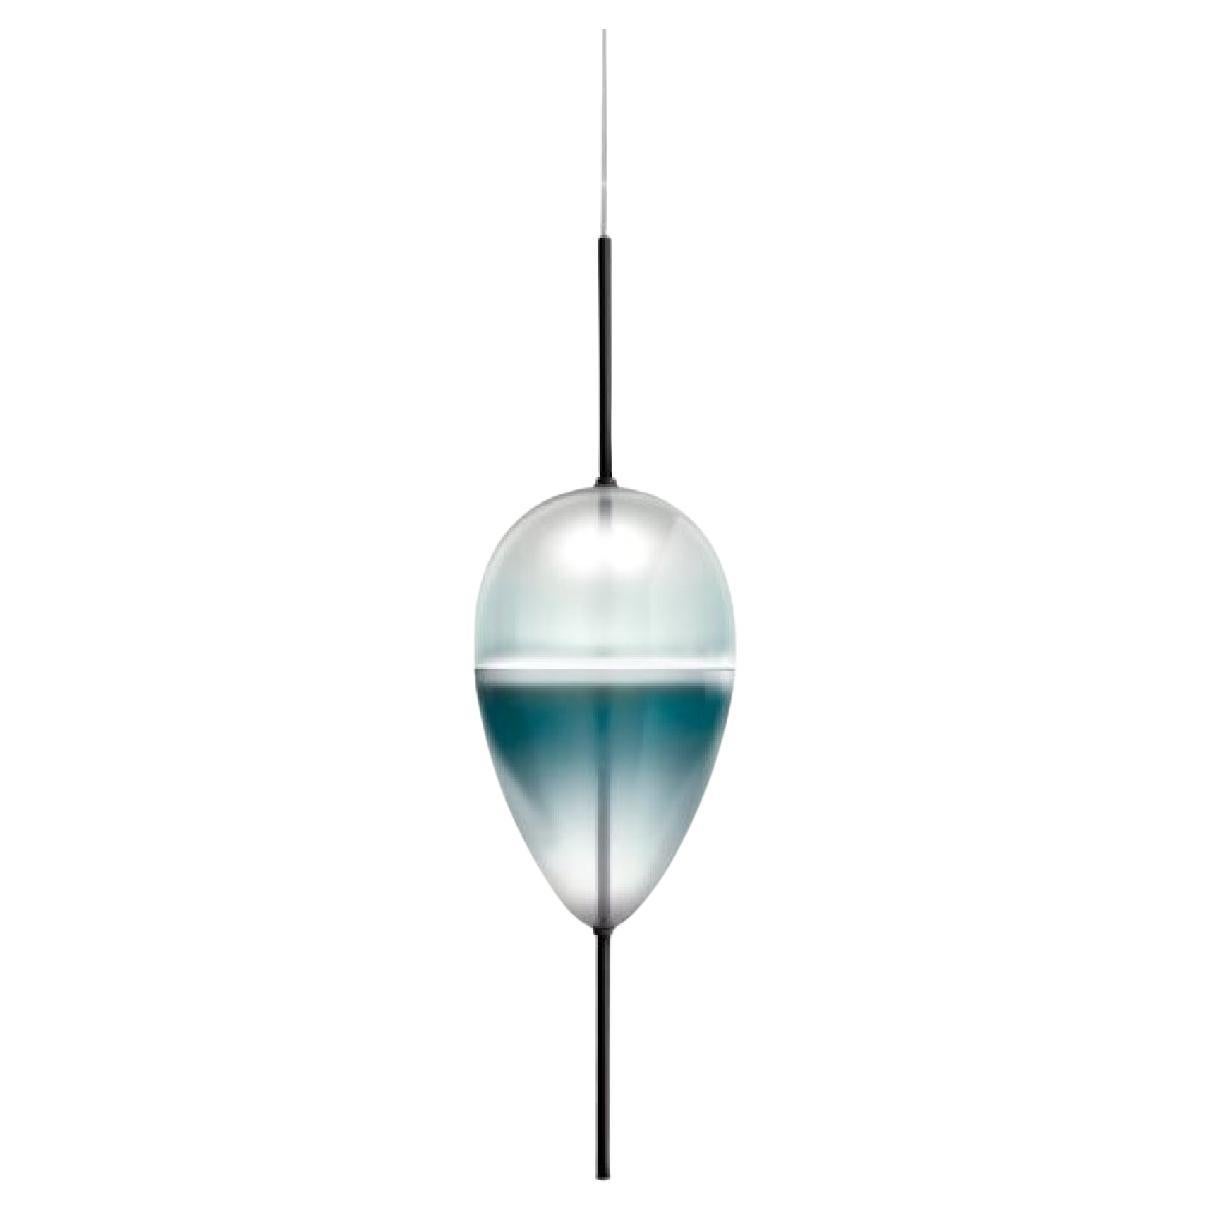 FLOW[T] S7 Pendant lamp in Turquoise by Nao Tamura for Wonderglass For Sale